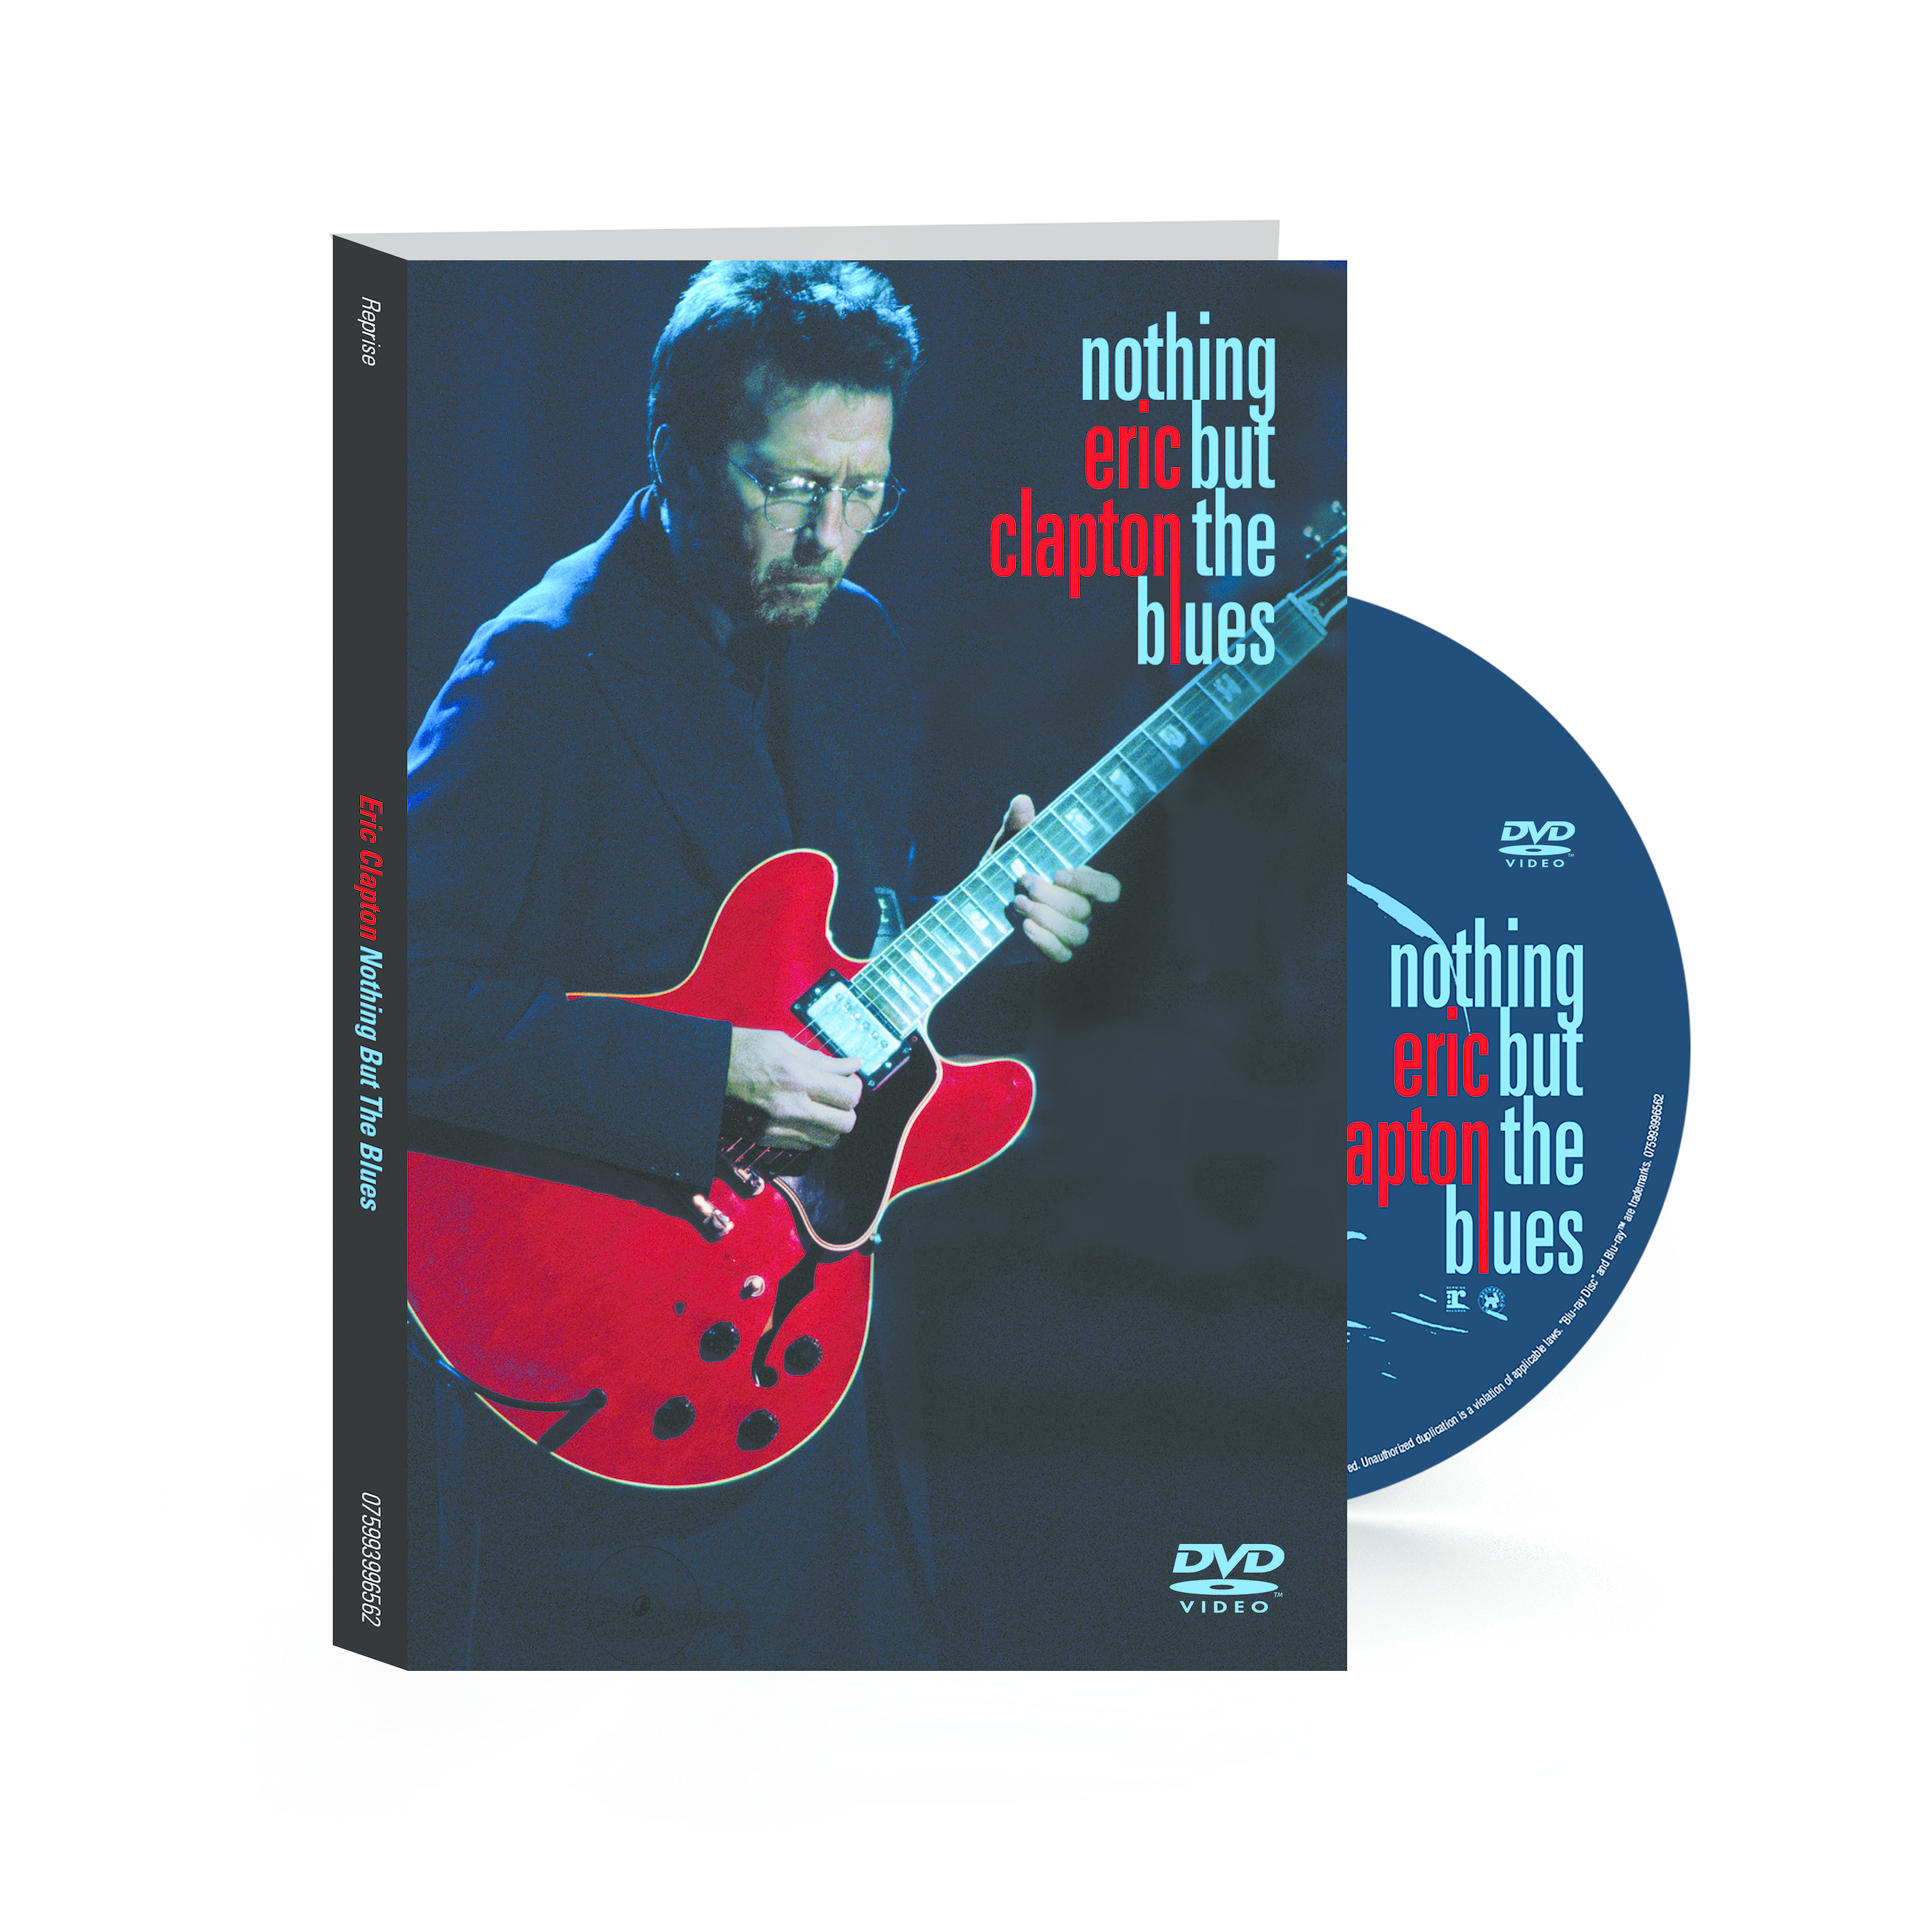 Eric Clapton THE - (DVD) BUT NOTHING - BLUES